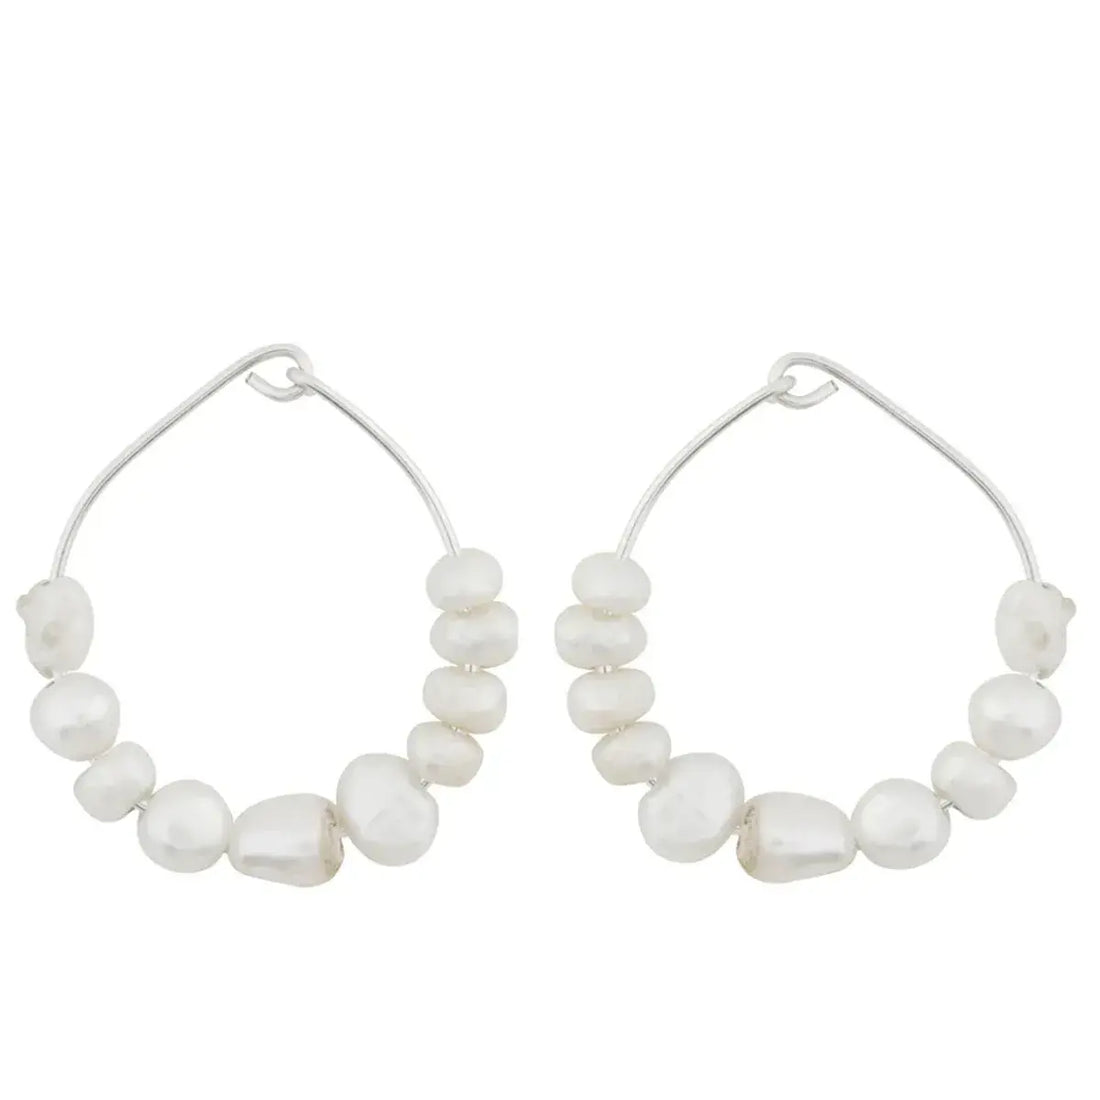 The Venus Pearl Hoops by Made by a. in Silver 